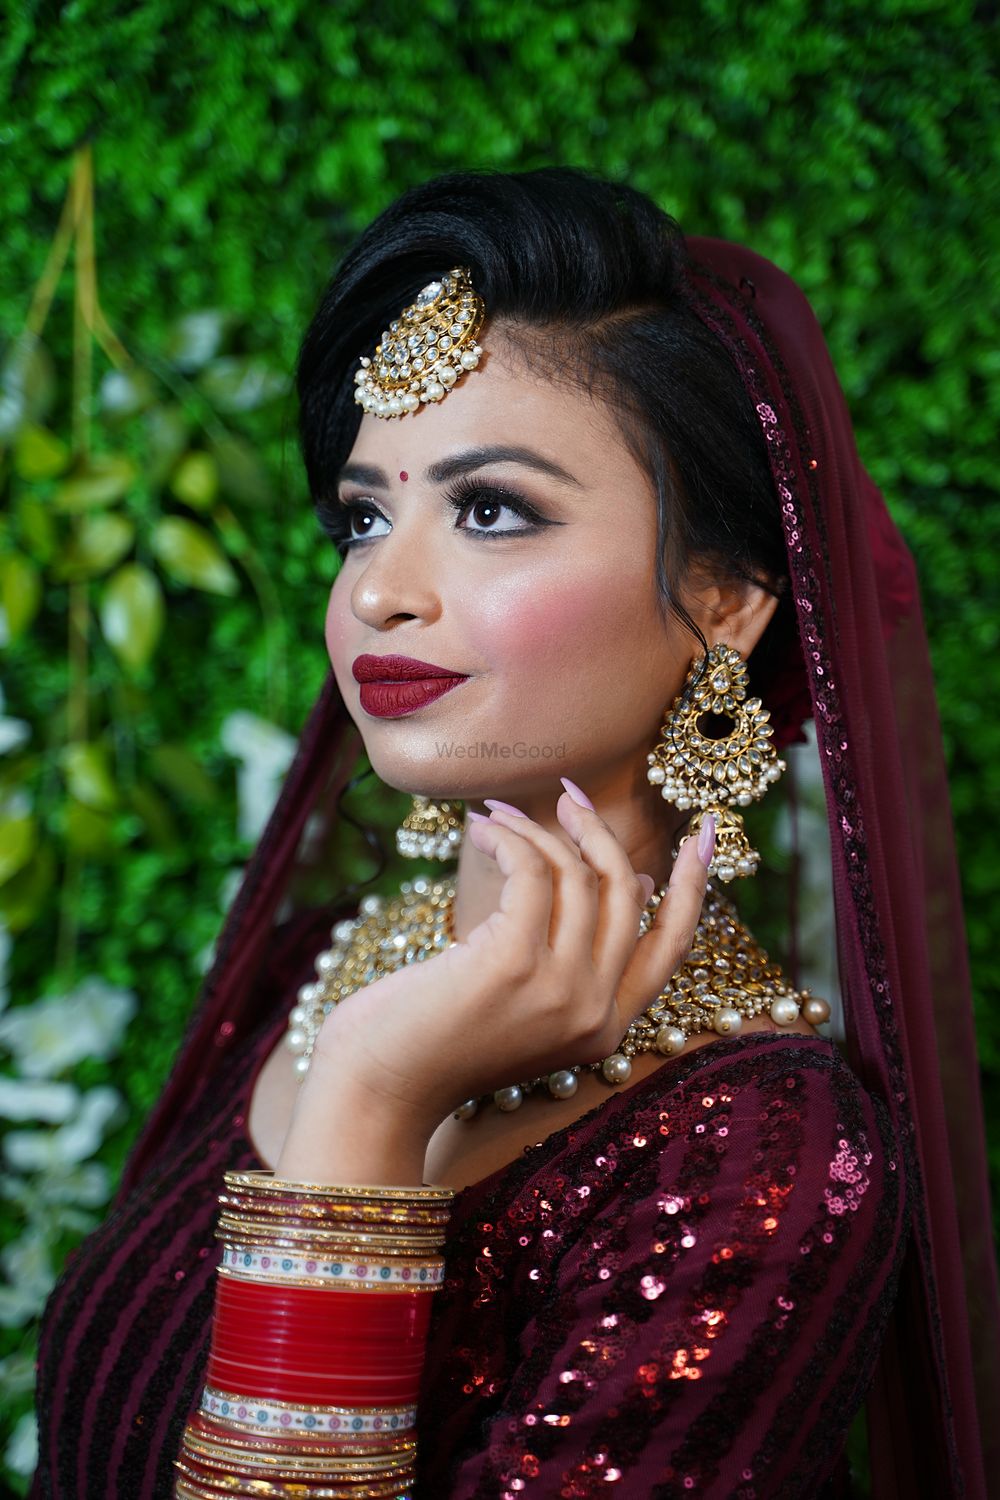 Photo From Best Bridal Makeup - By Vioz Salon